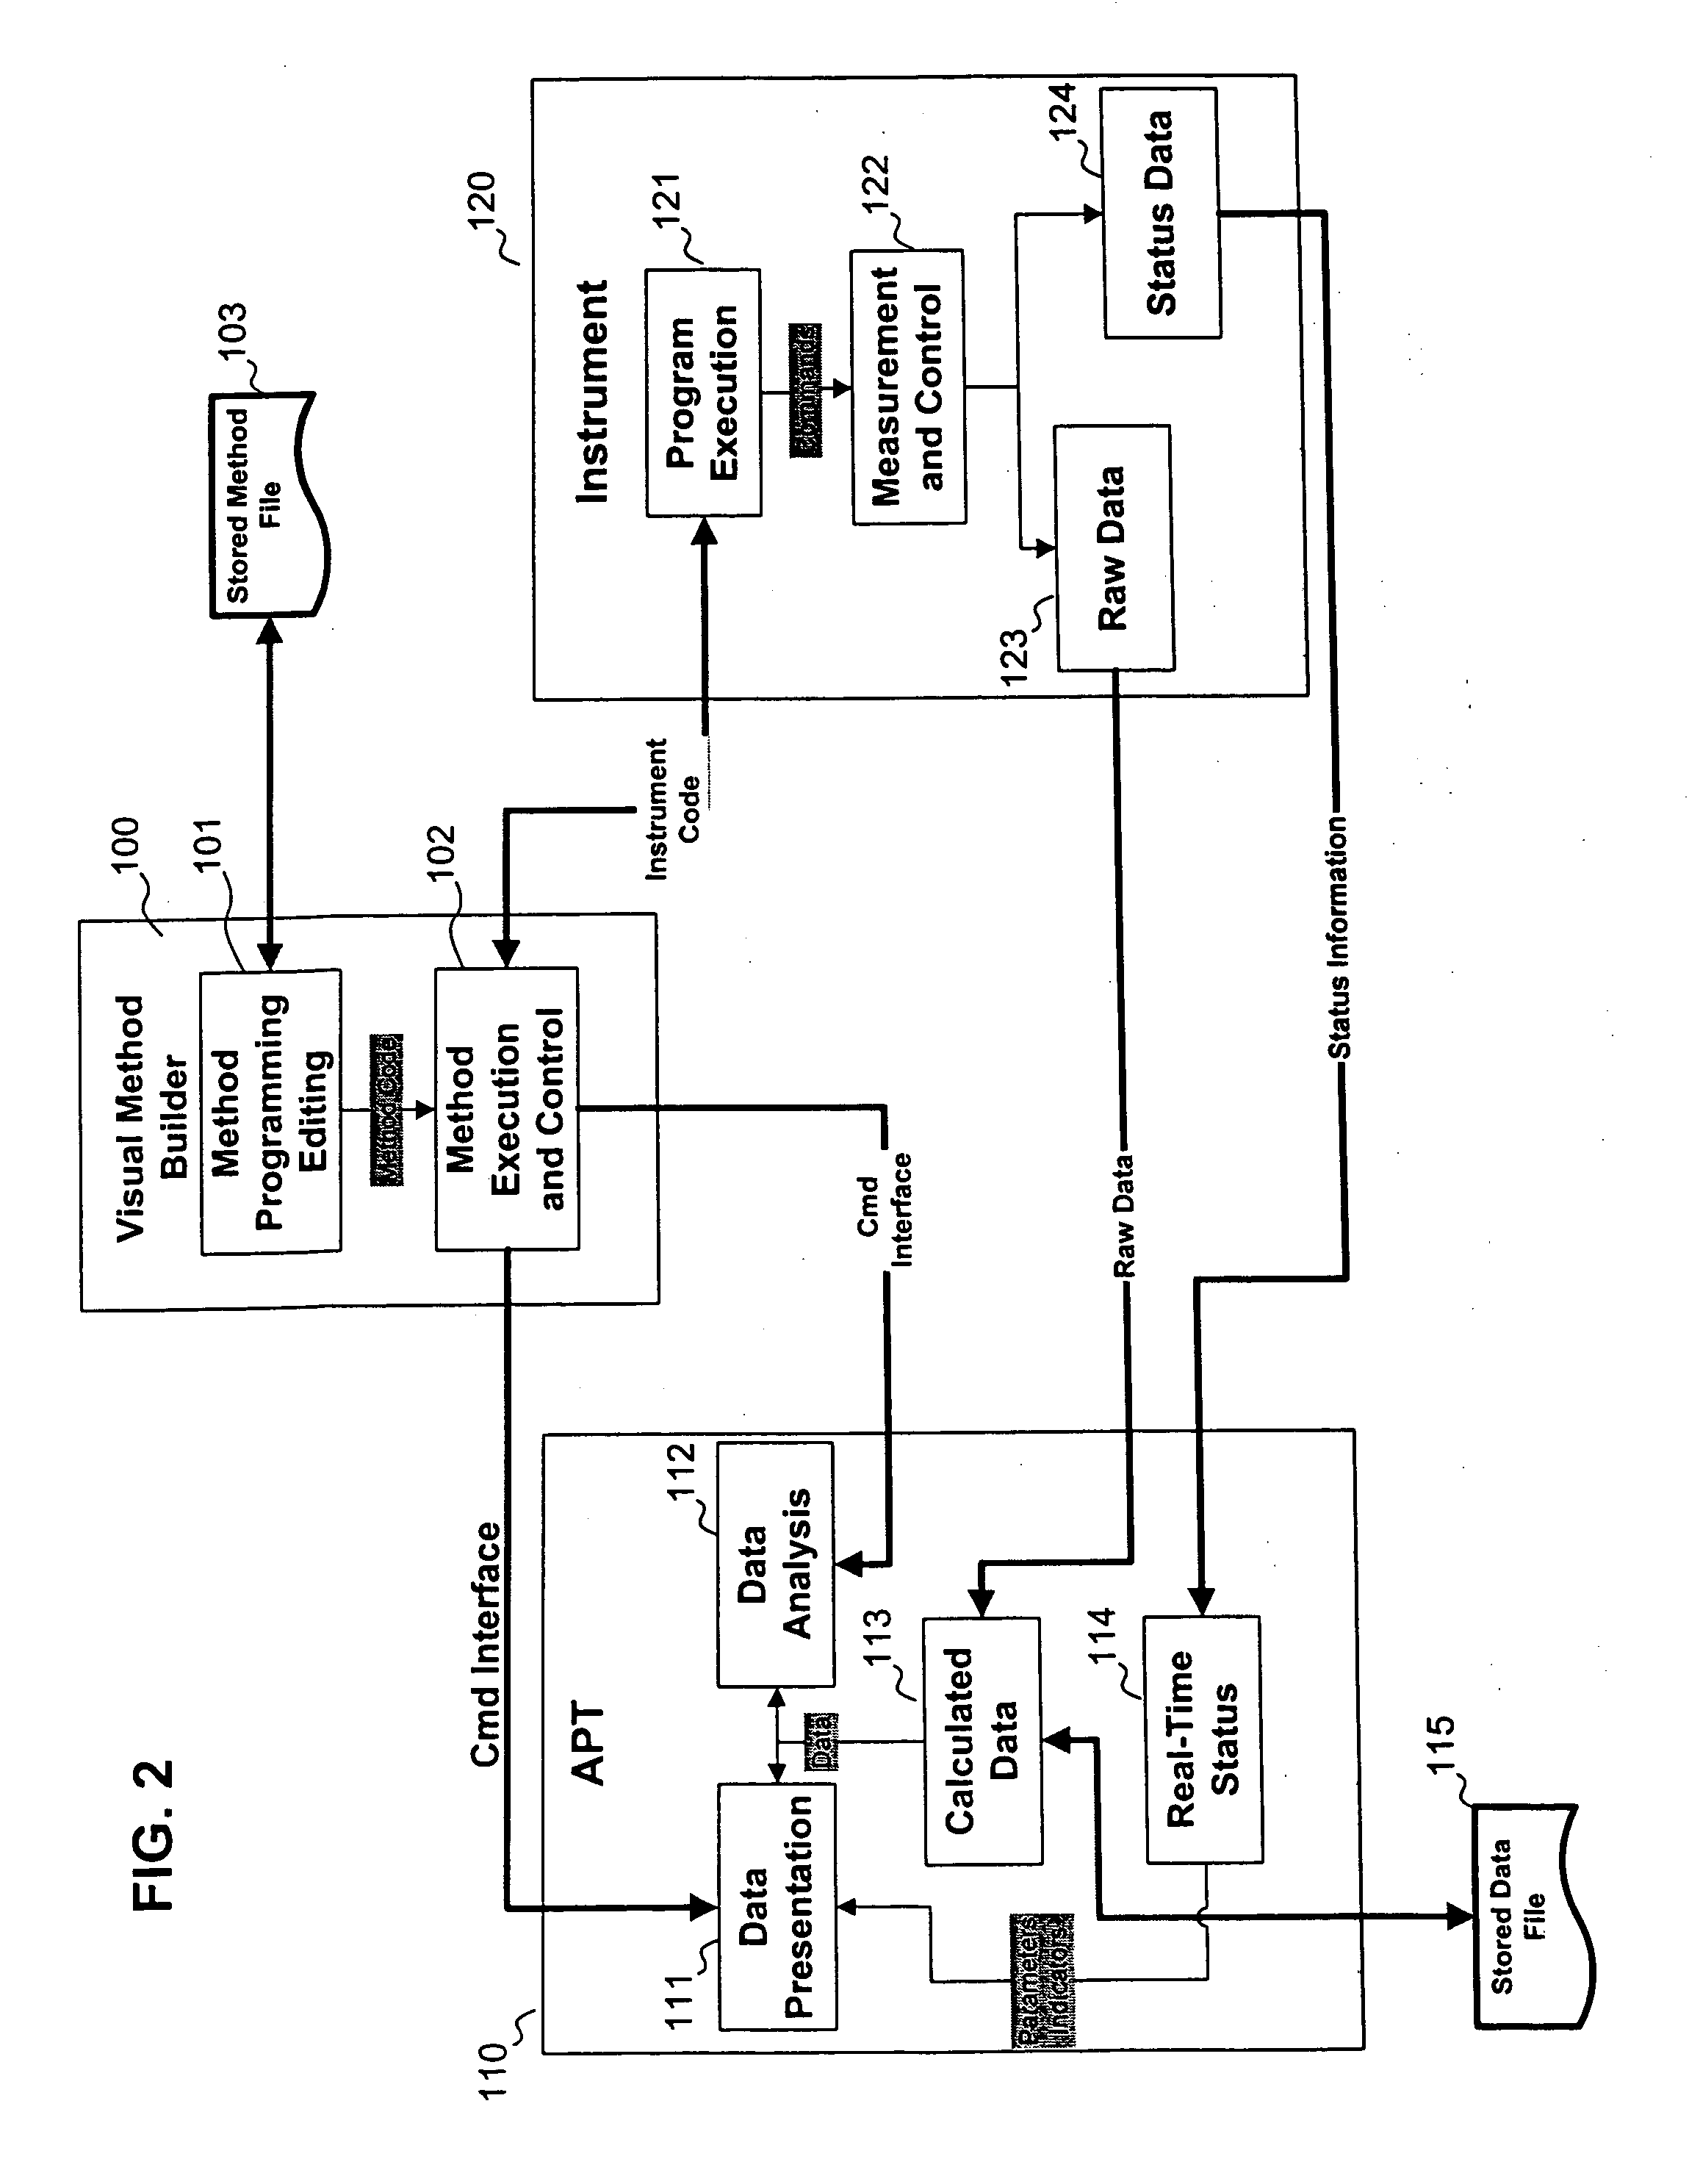 System and method for dynamically controlling operation of rheometric instruments